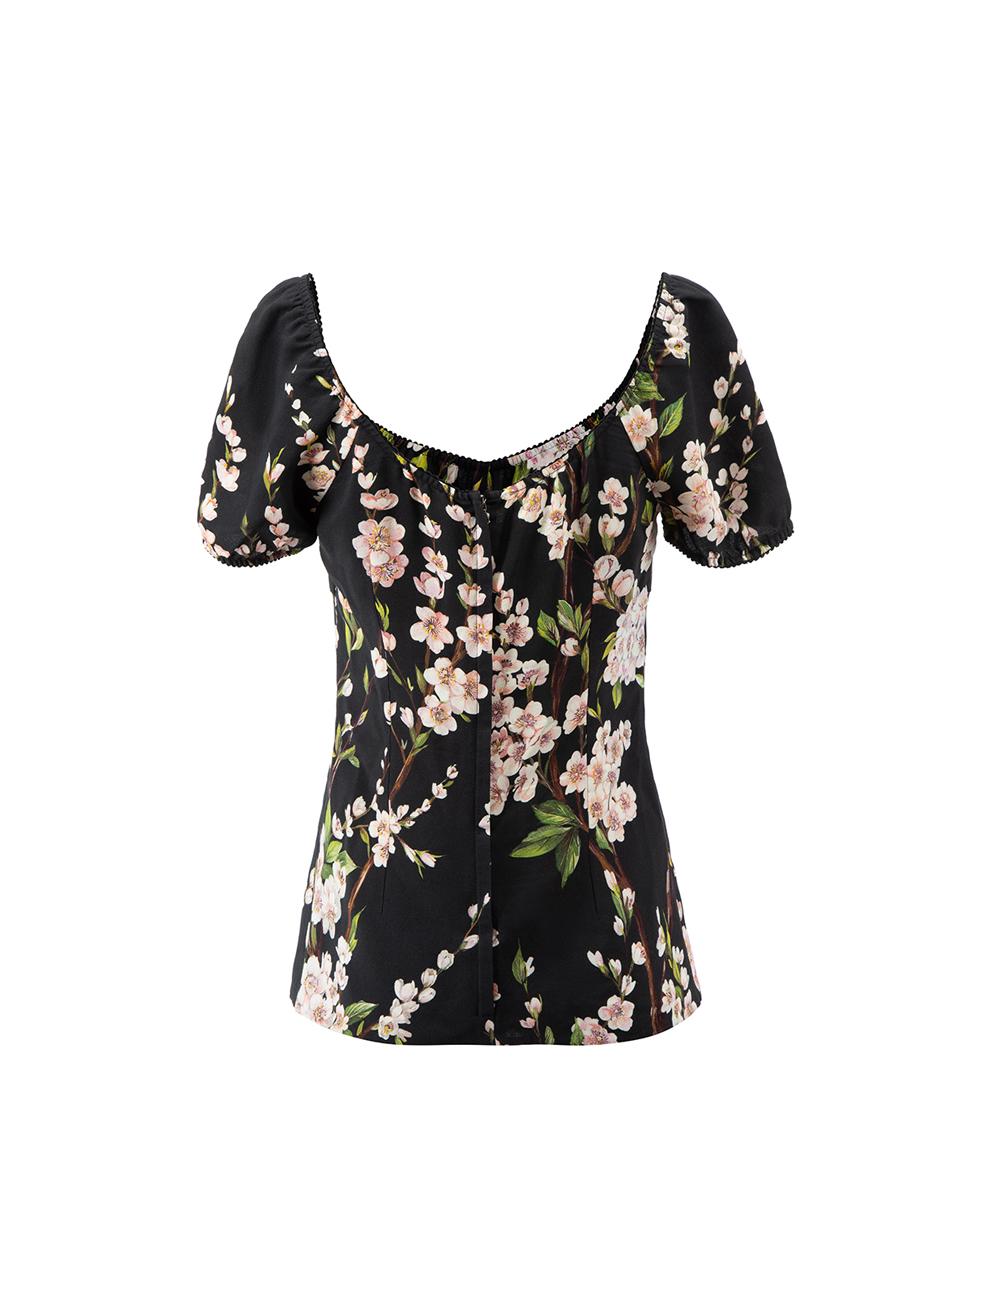 Black Floral Short Sleeve Top Size S In Good Condition For Sale In London, GB